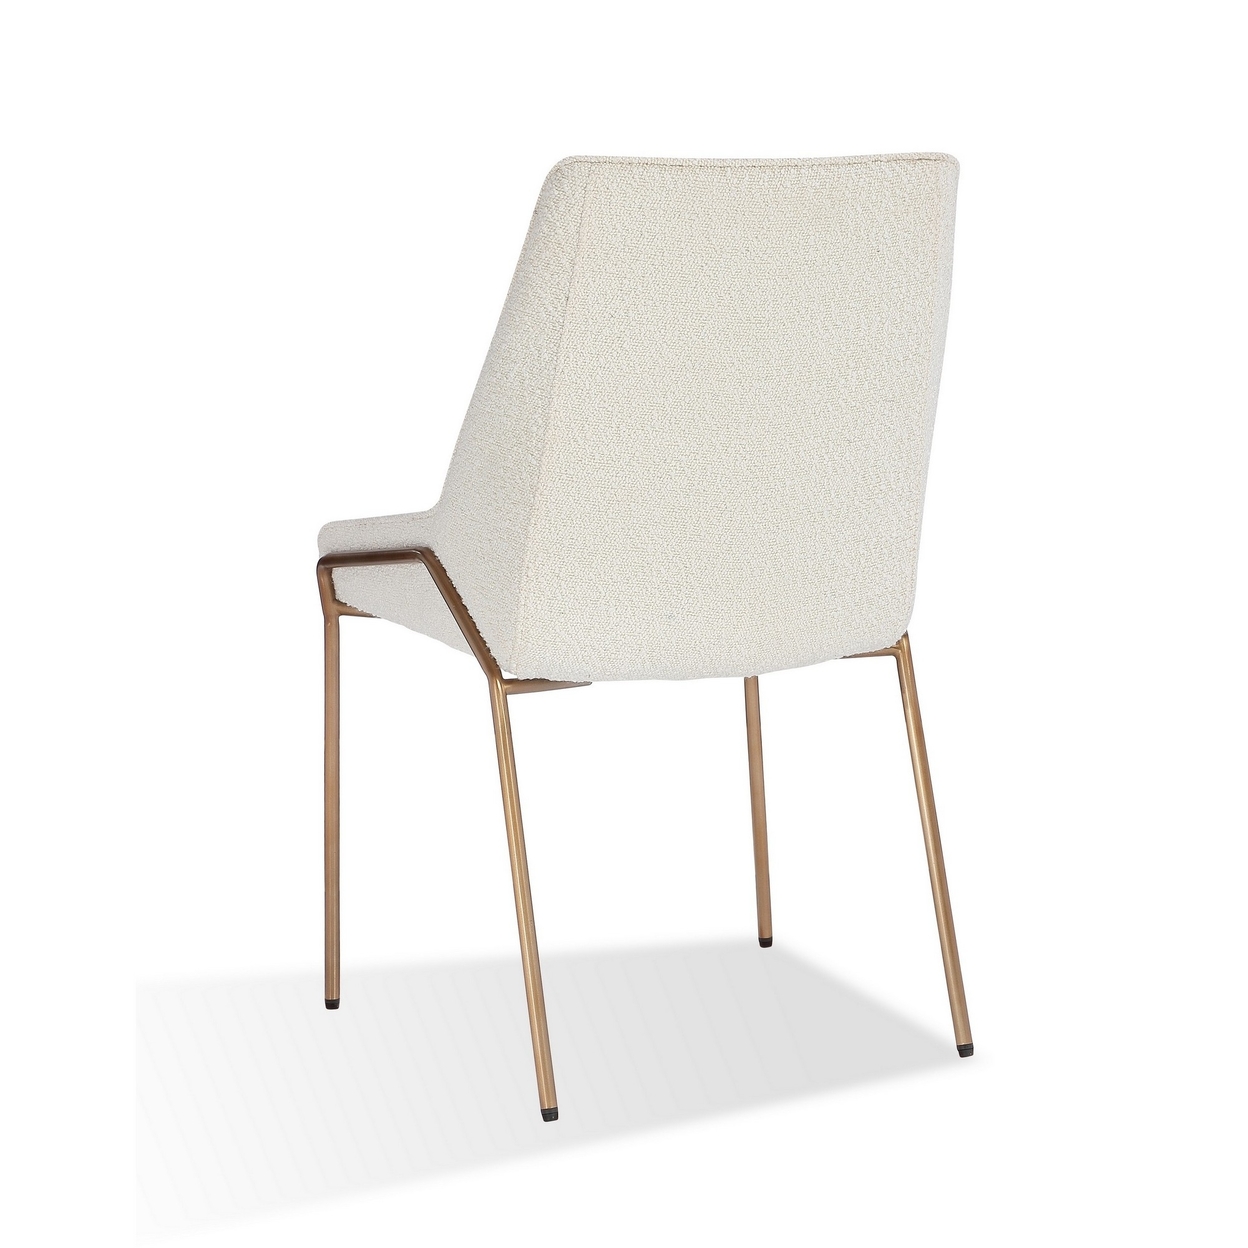 Rise 21 Inch Dining Chair, Boucle Upholstery, Tapered Legs, White, Bronze -Saltoro Sherpi